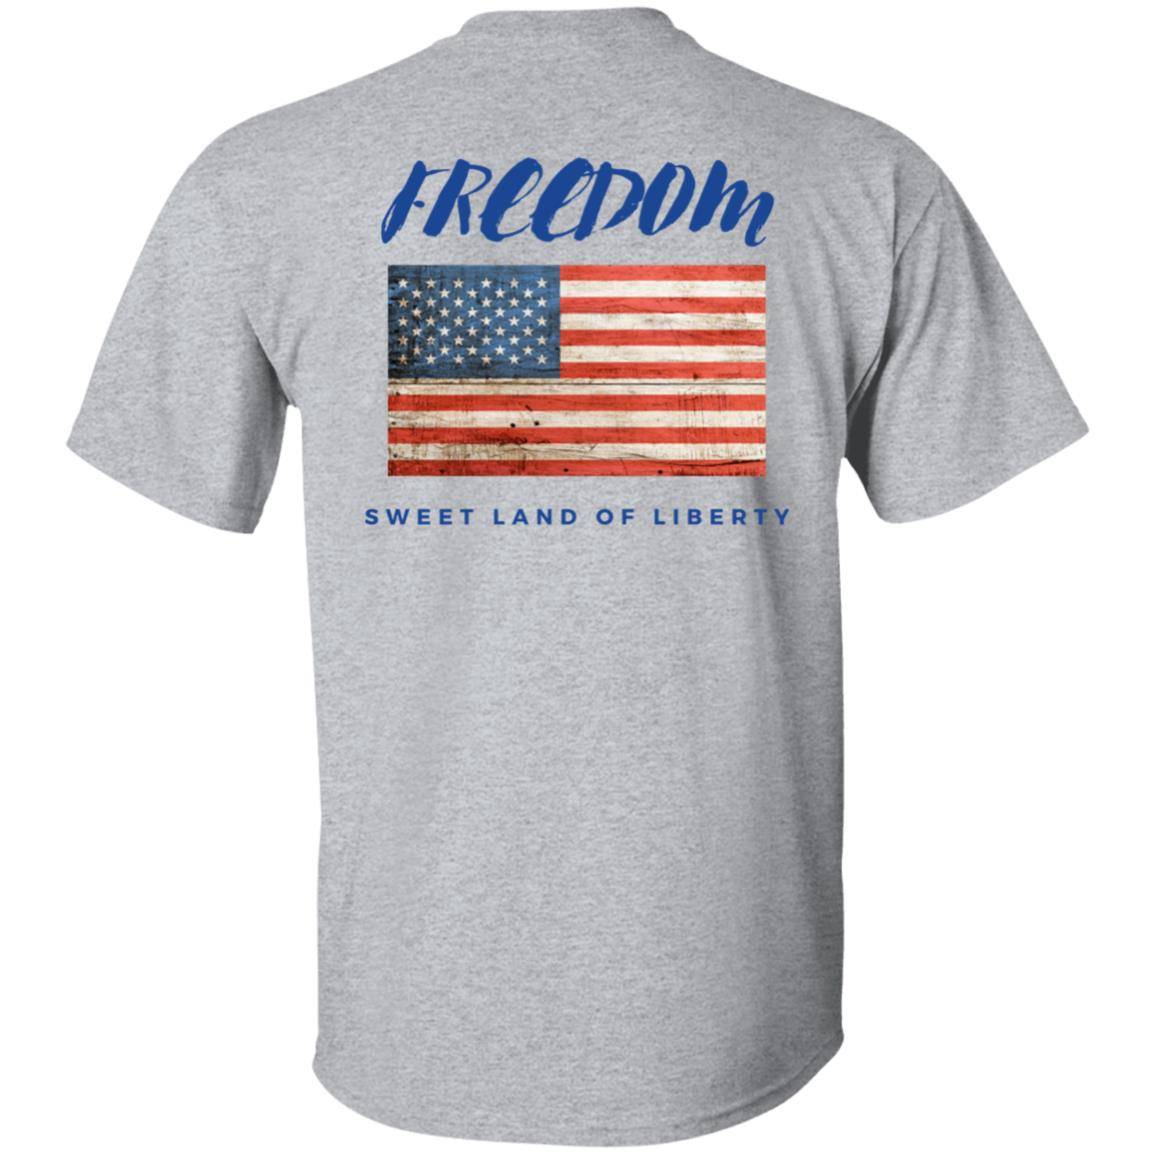 Sport gray, heavyweight classic unisex t-shirt in 100% cotton. Freedom is written across the chest back with a grunge American flag below it and written beneath that is Sweet Land of Liberty.